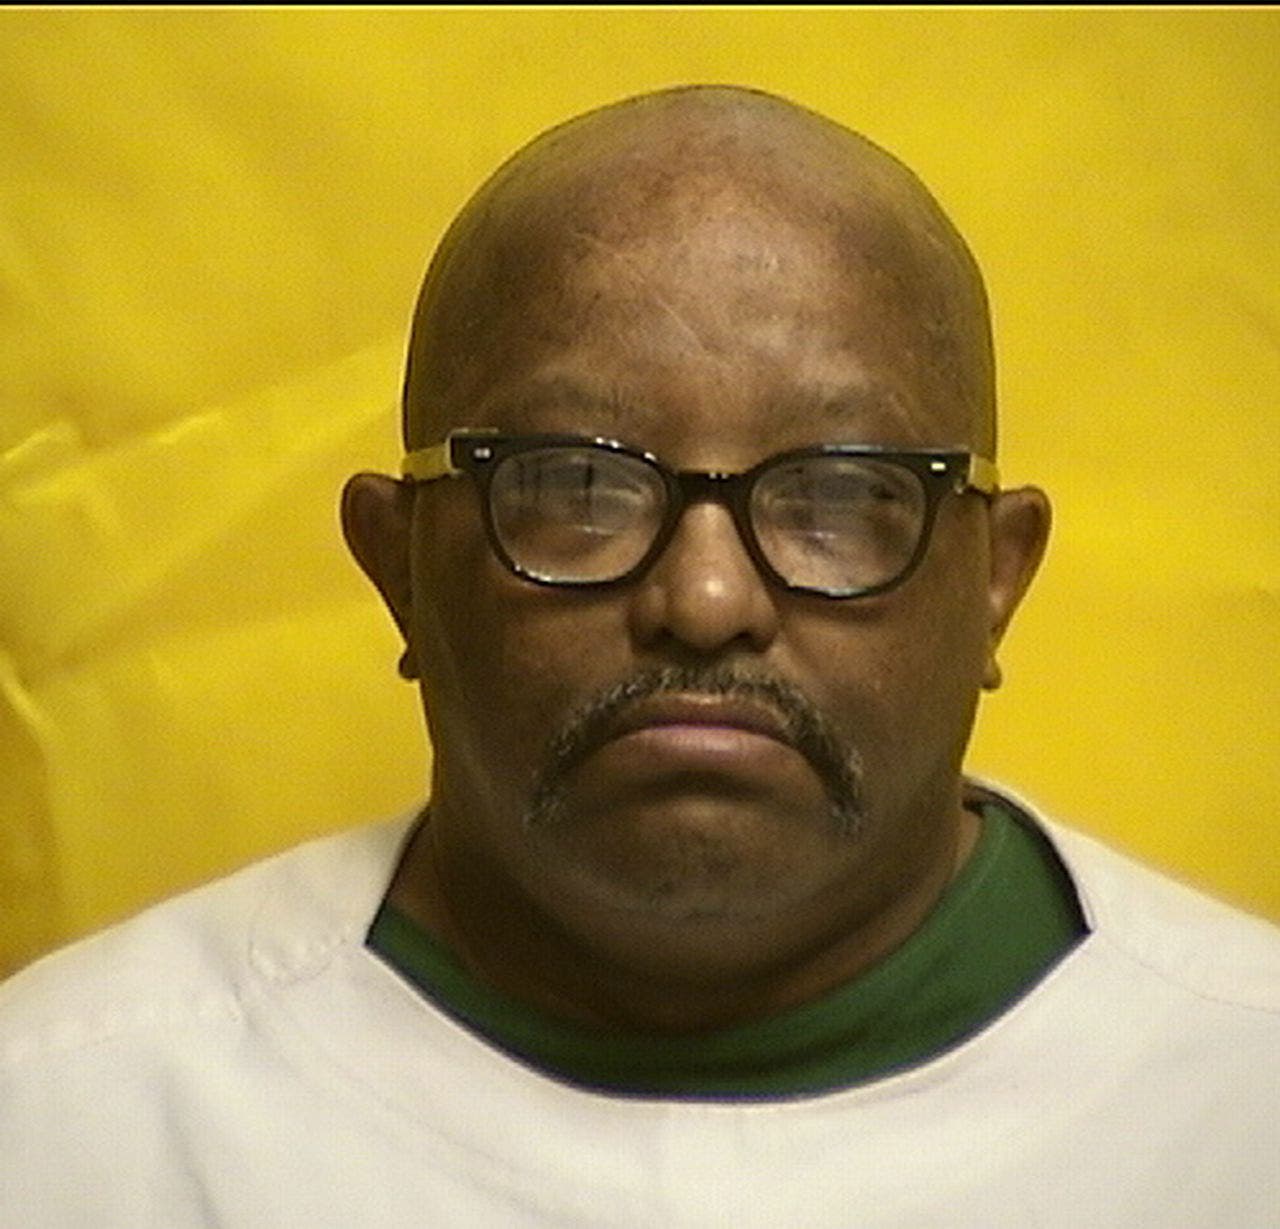 Cleveland serial killer Anthony Sowell dies in prison hospital